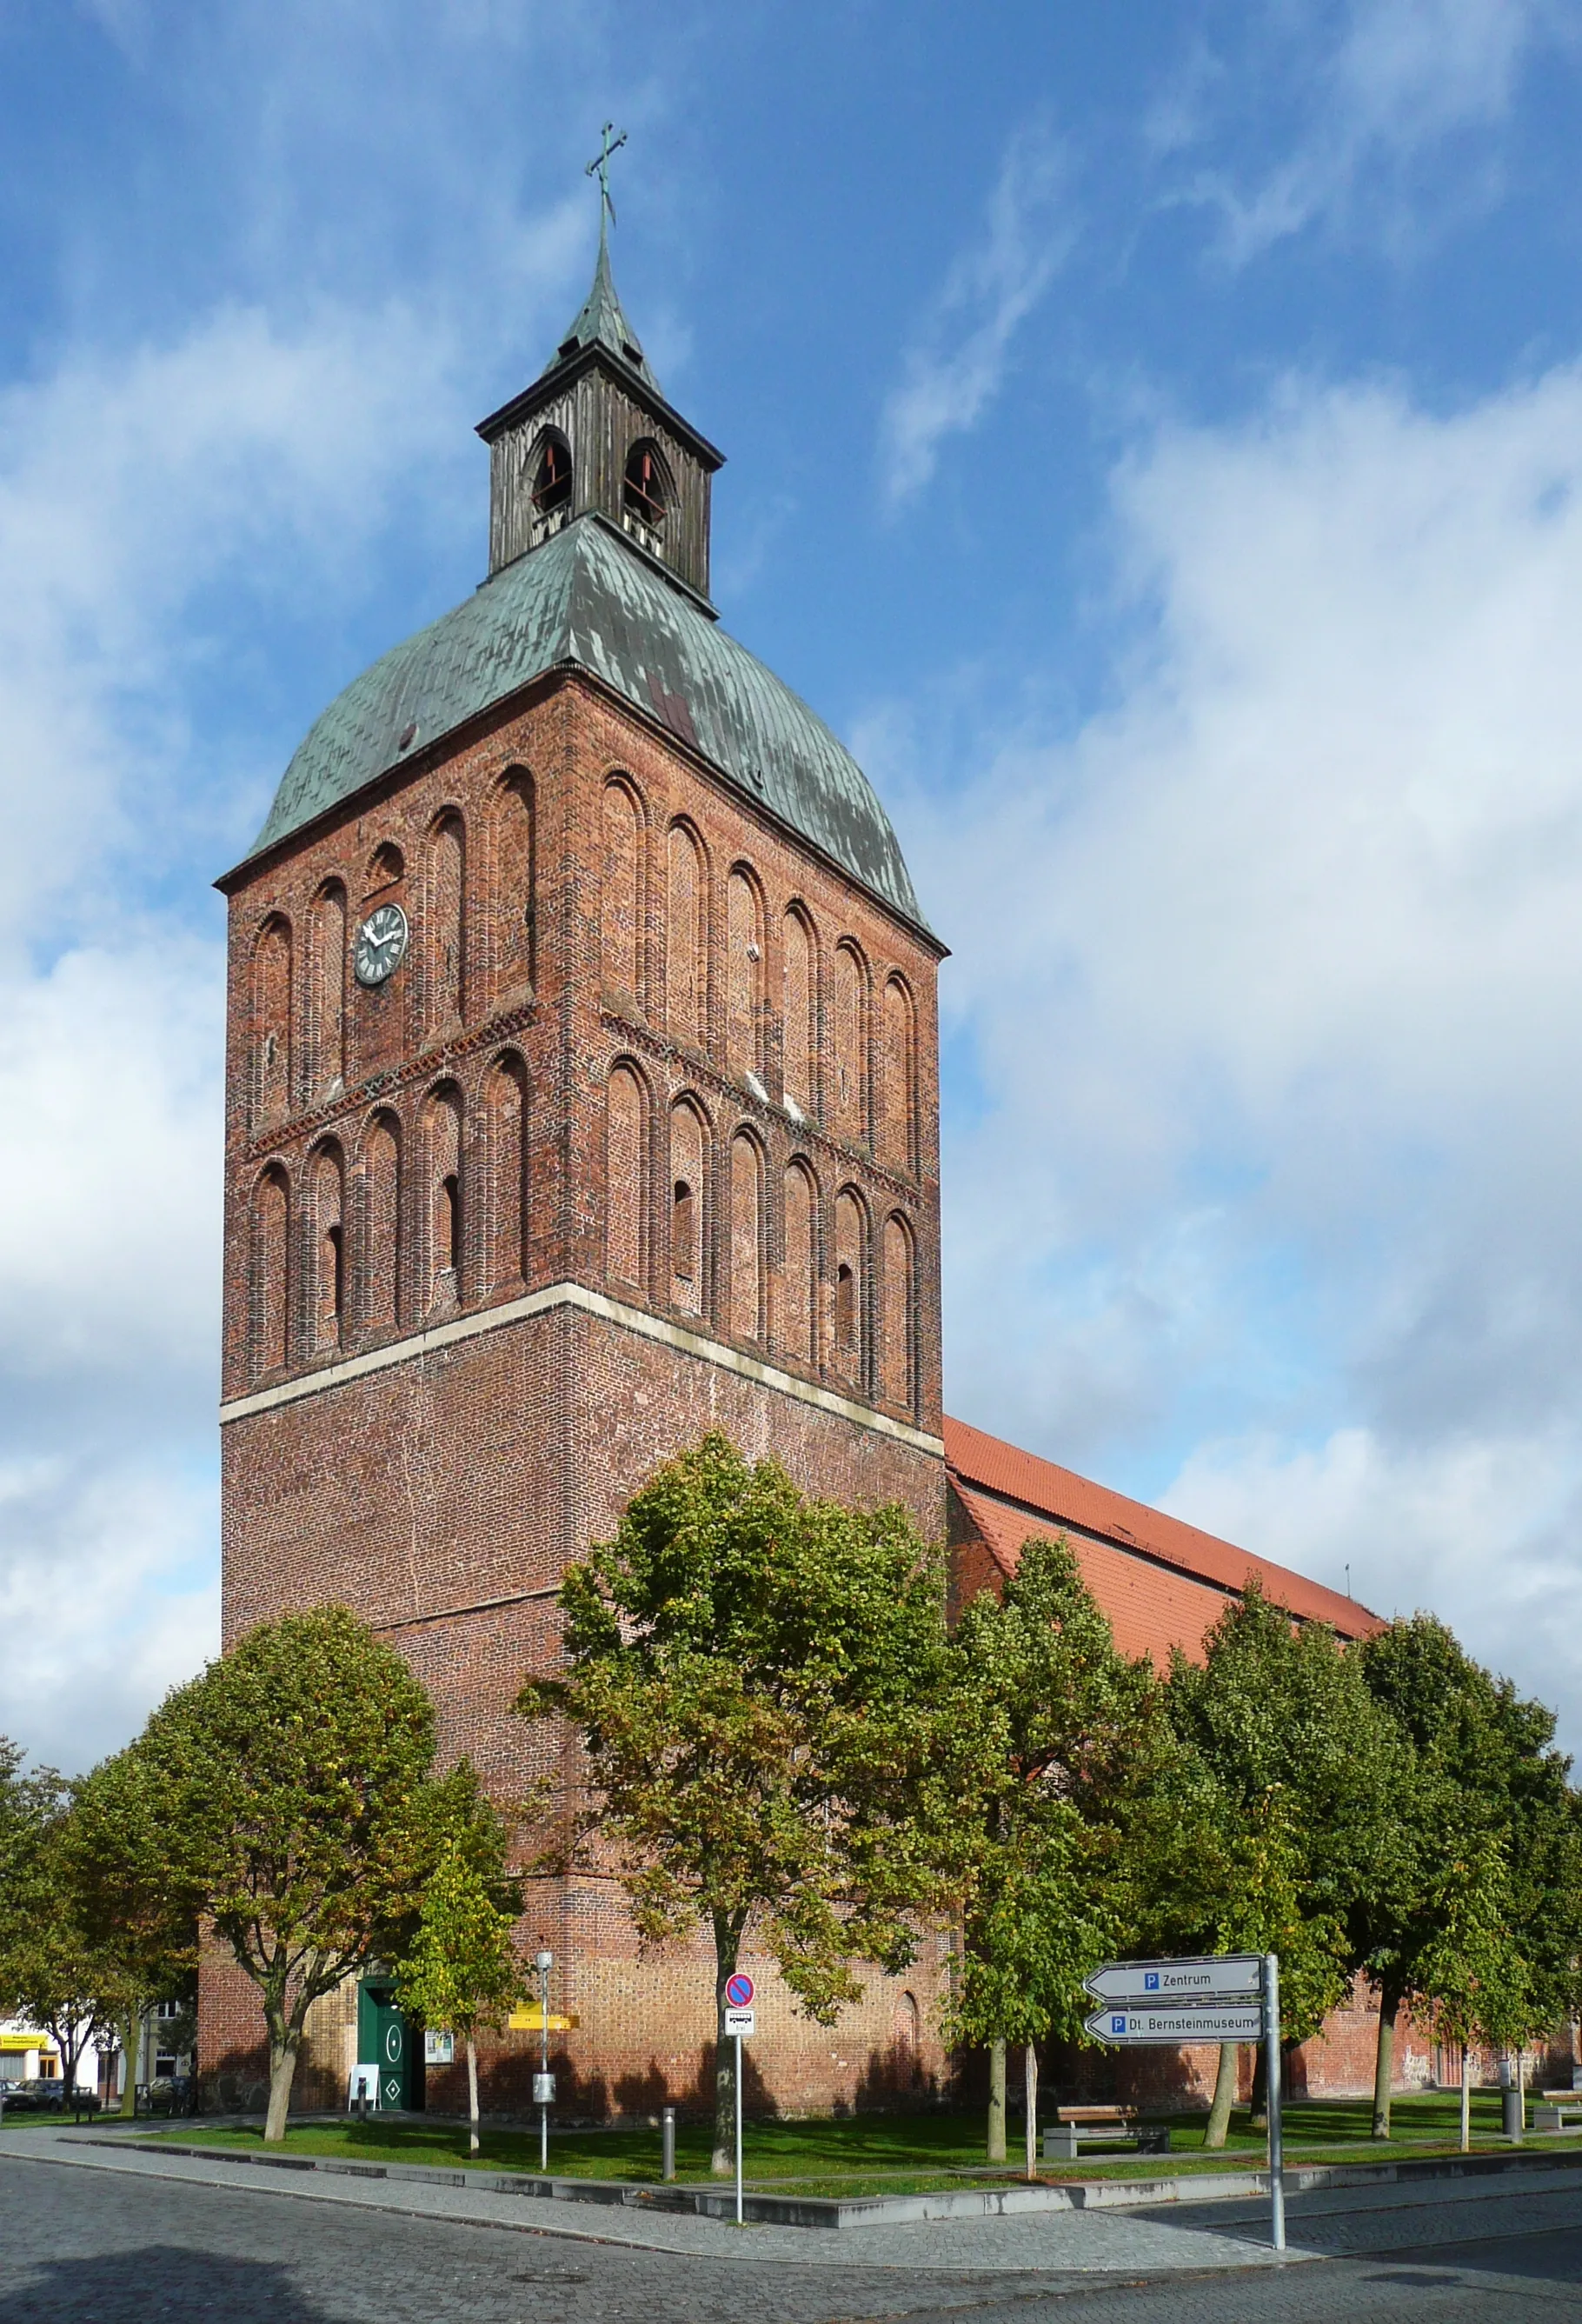 Photo showing: This image shows the St. Mary's Church in Ribnitz-Damgarten.